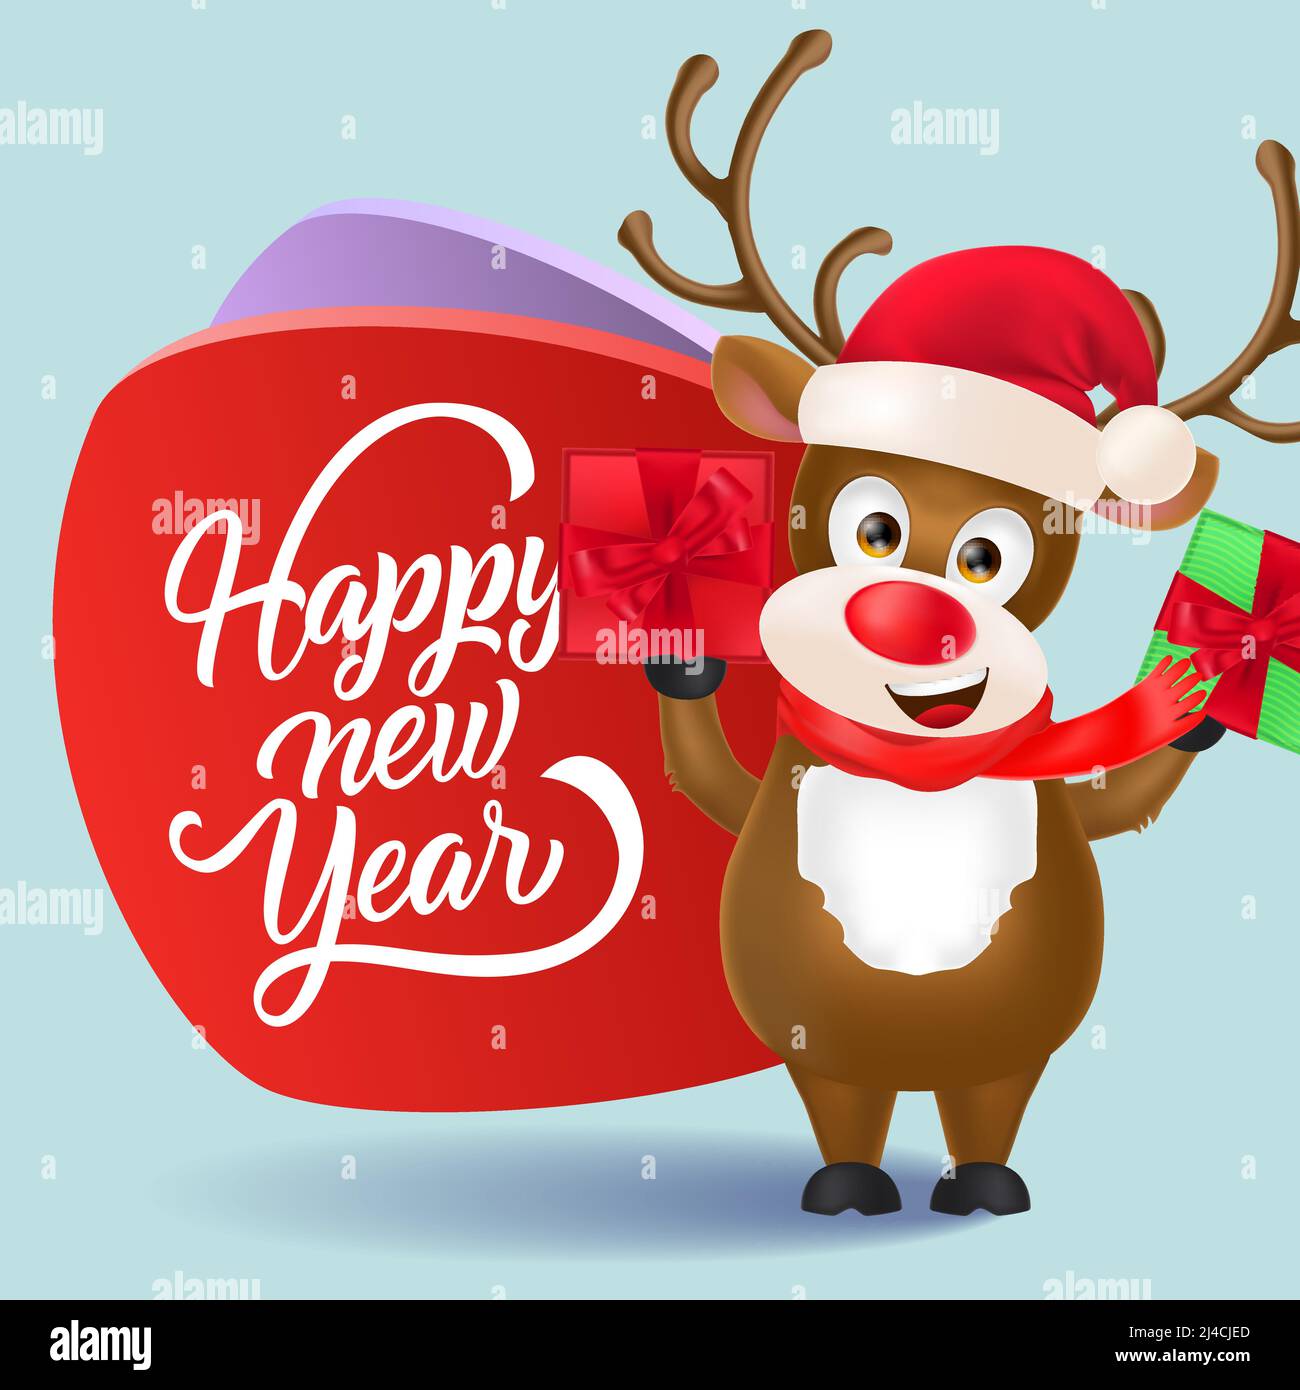 For santa and - Alamy Stock rudolph Page 3 - Vector Images